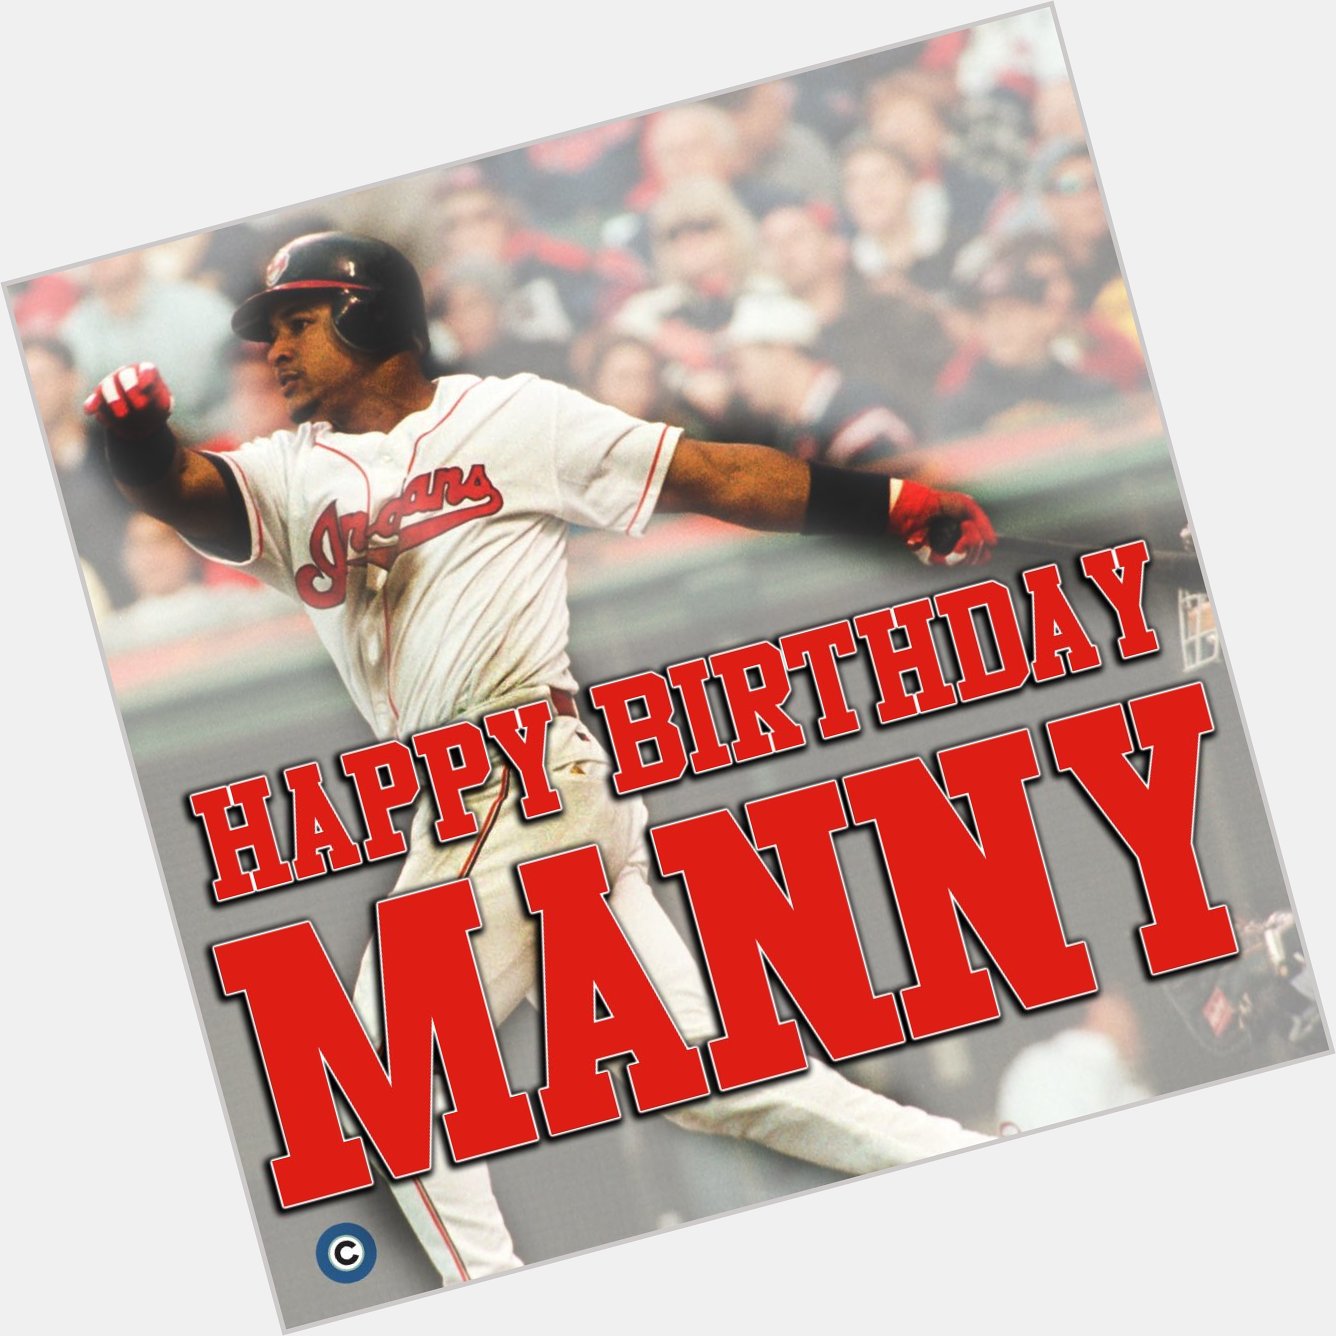 Wish former Tribe slugger Manny Ramirez a happy birthday! What s your favorite Manny moment? Photo: AP. 